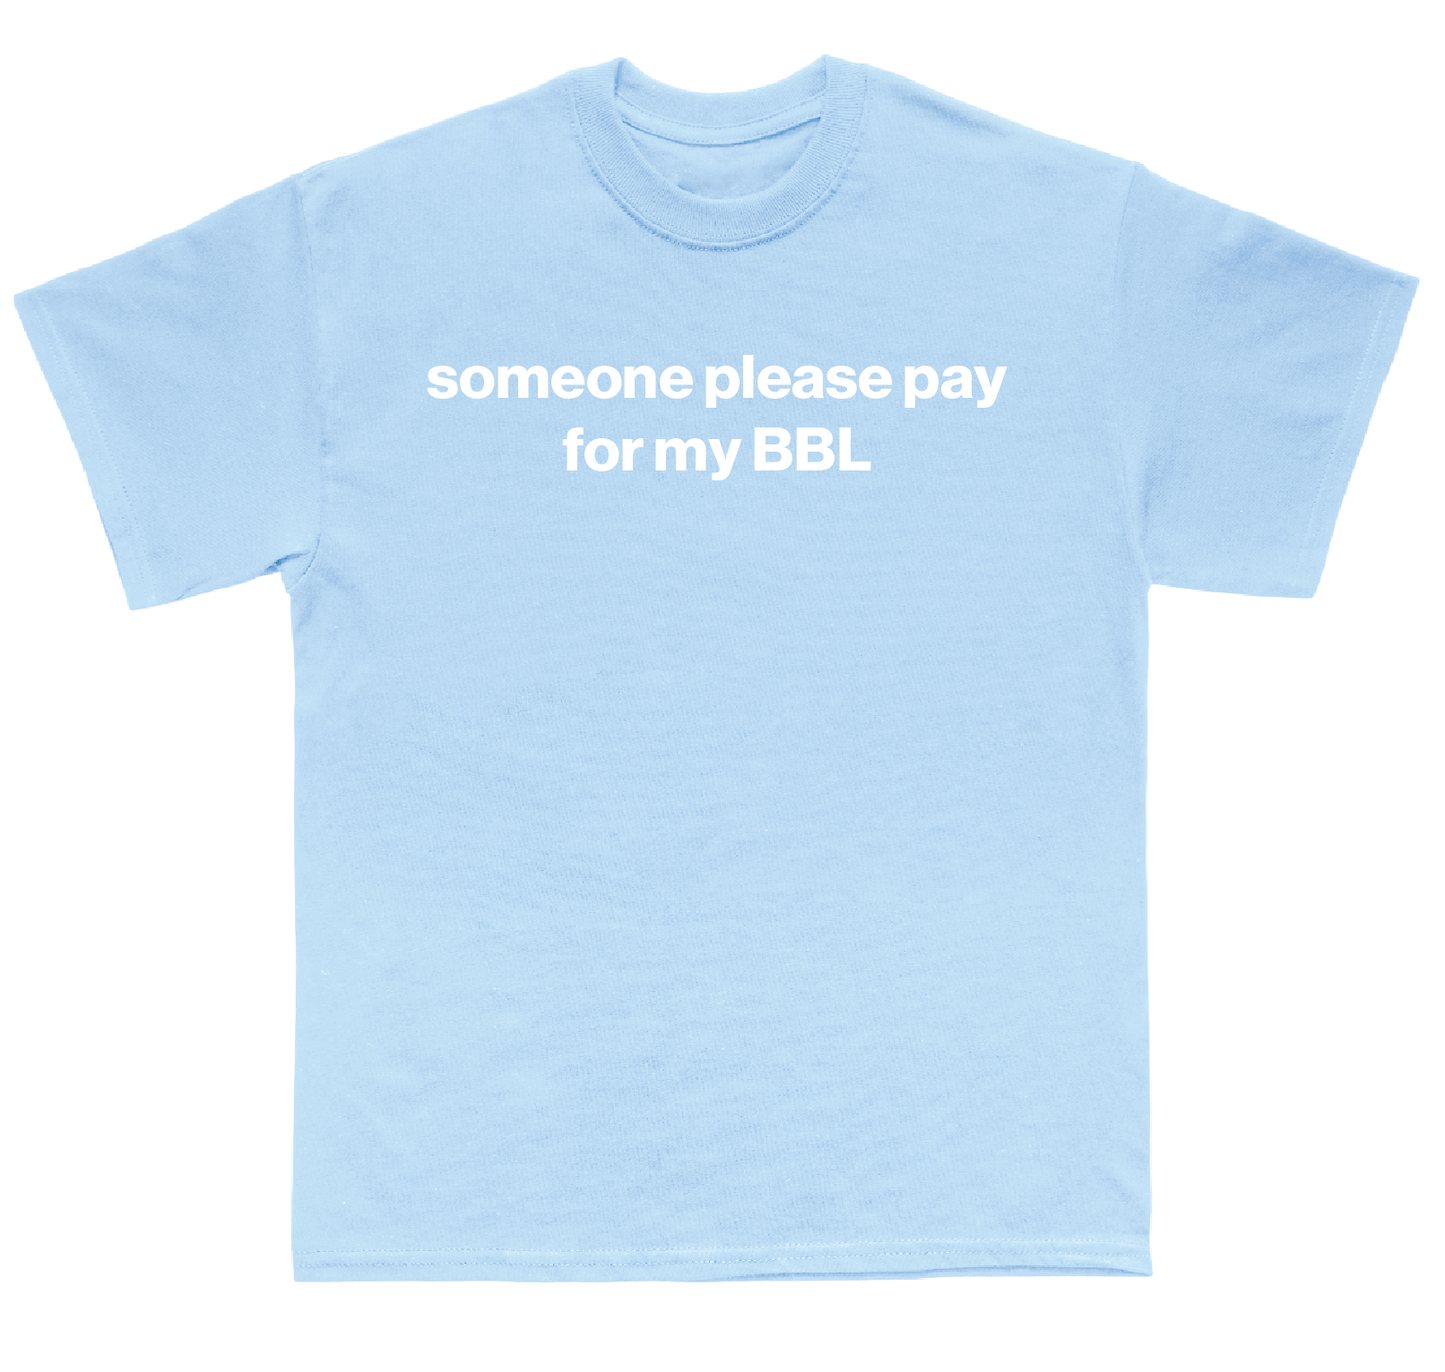 someone please pay for my BBL shirt